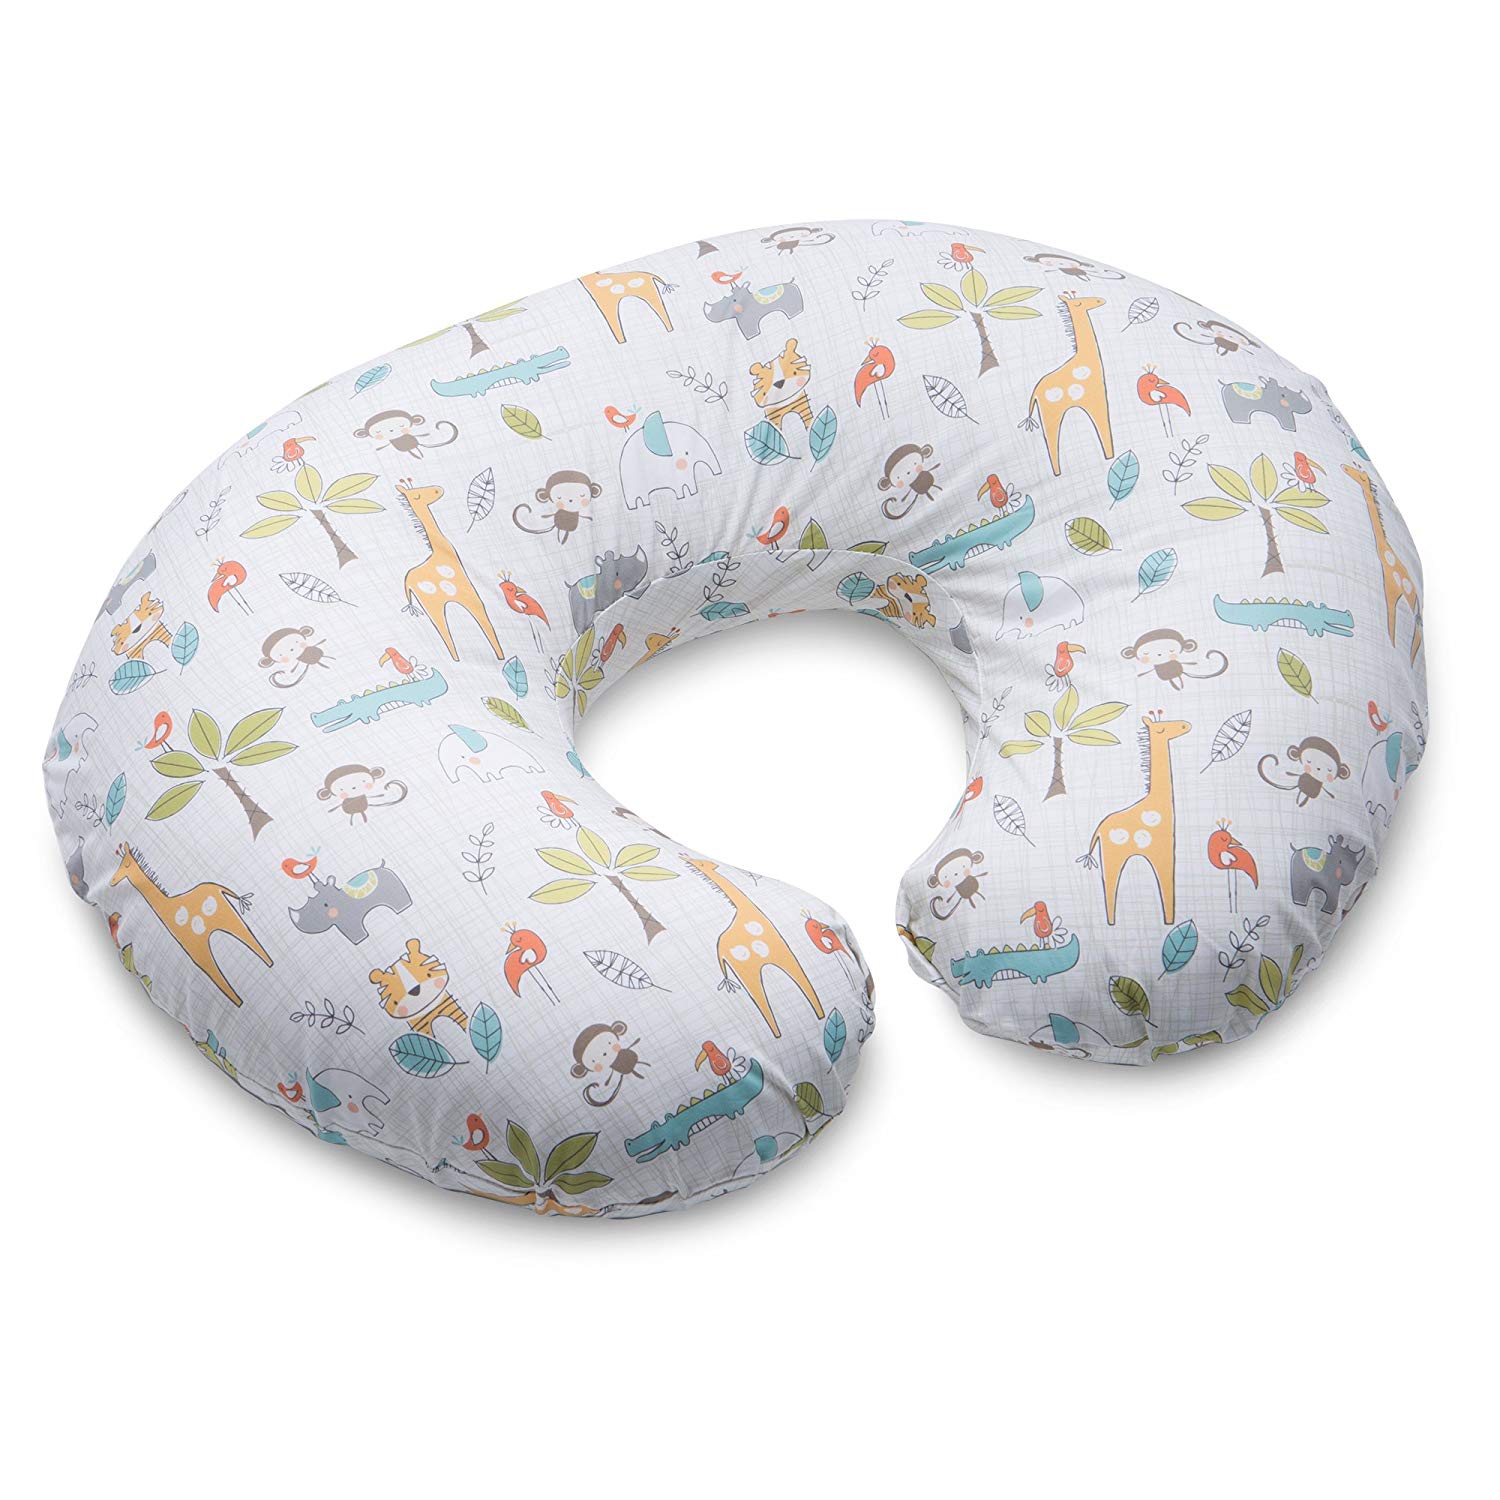 Can You Wash A Boppy Pillow Unbiased Boppy Pillow Reviews 2020 Tuck Sleep